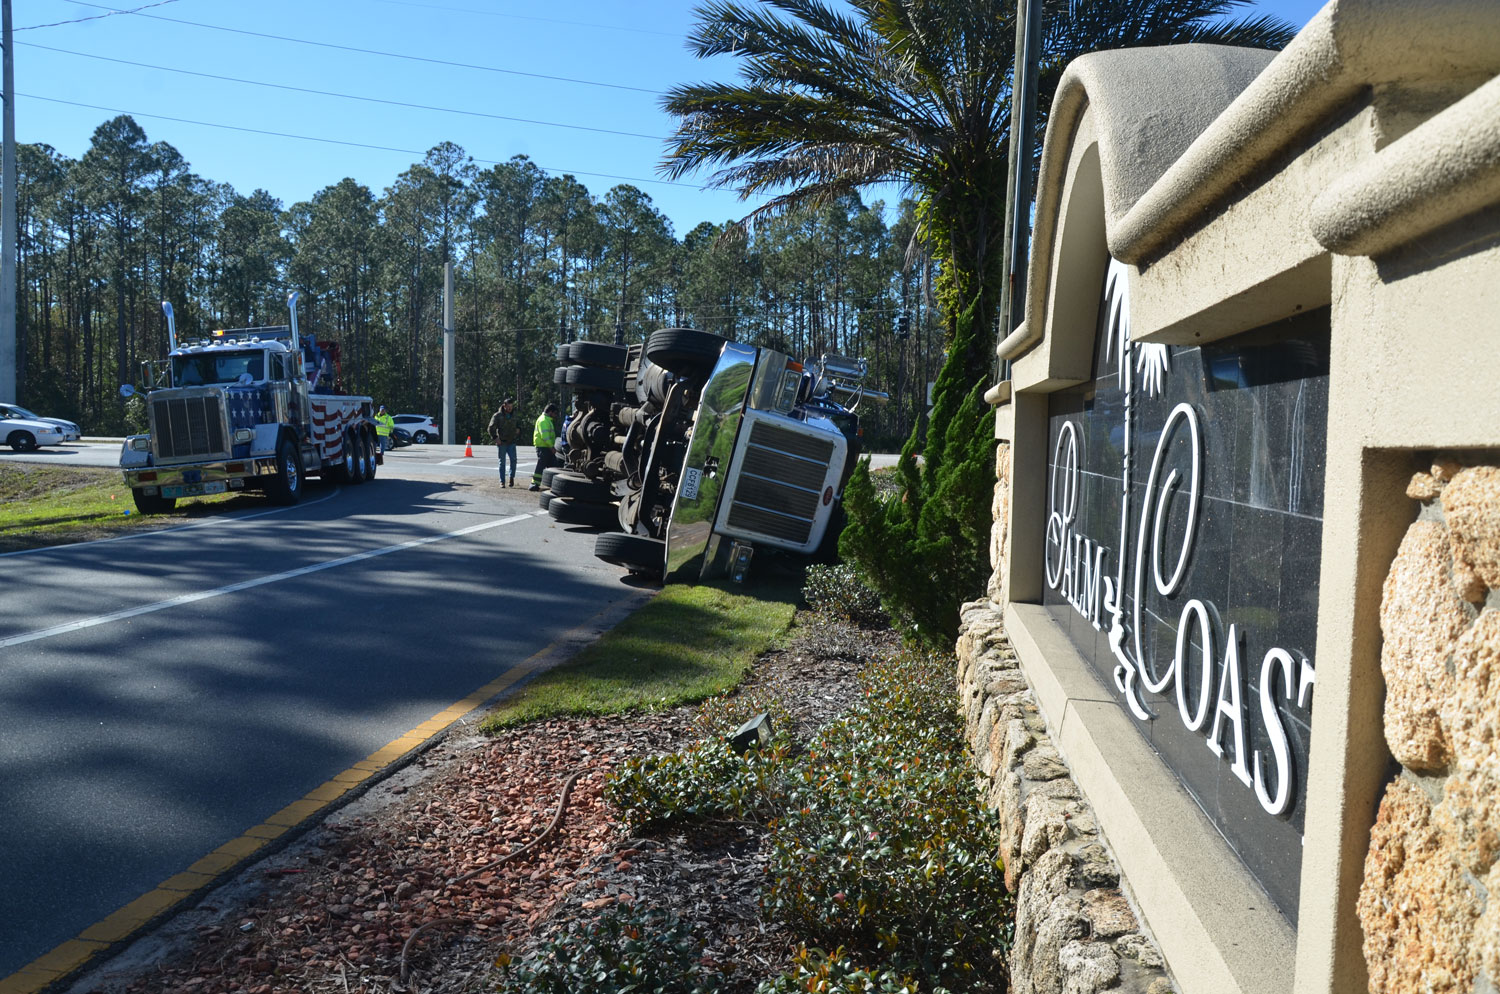 Welcome to Palm Coast: the semi overturned at the intersection of U.S. 1 with Palm Coast Parkway. (c FlaglerLive)